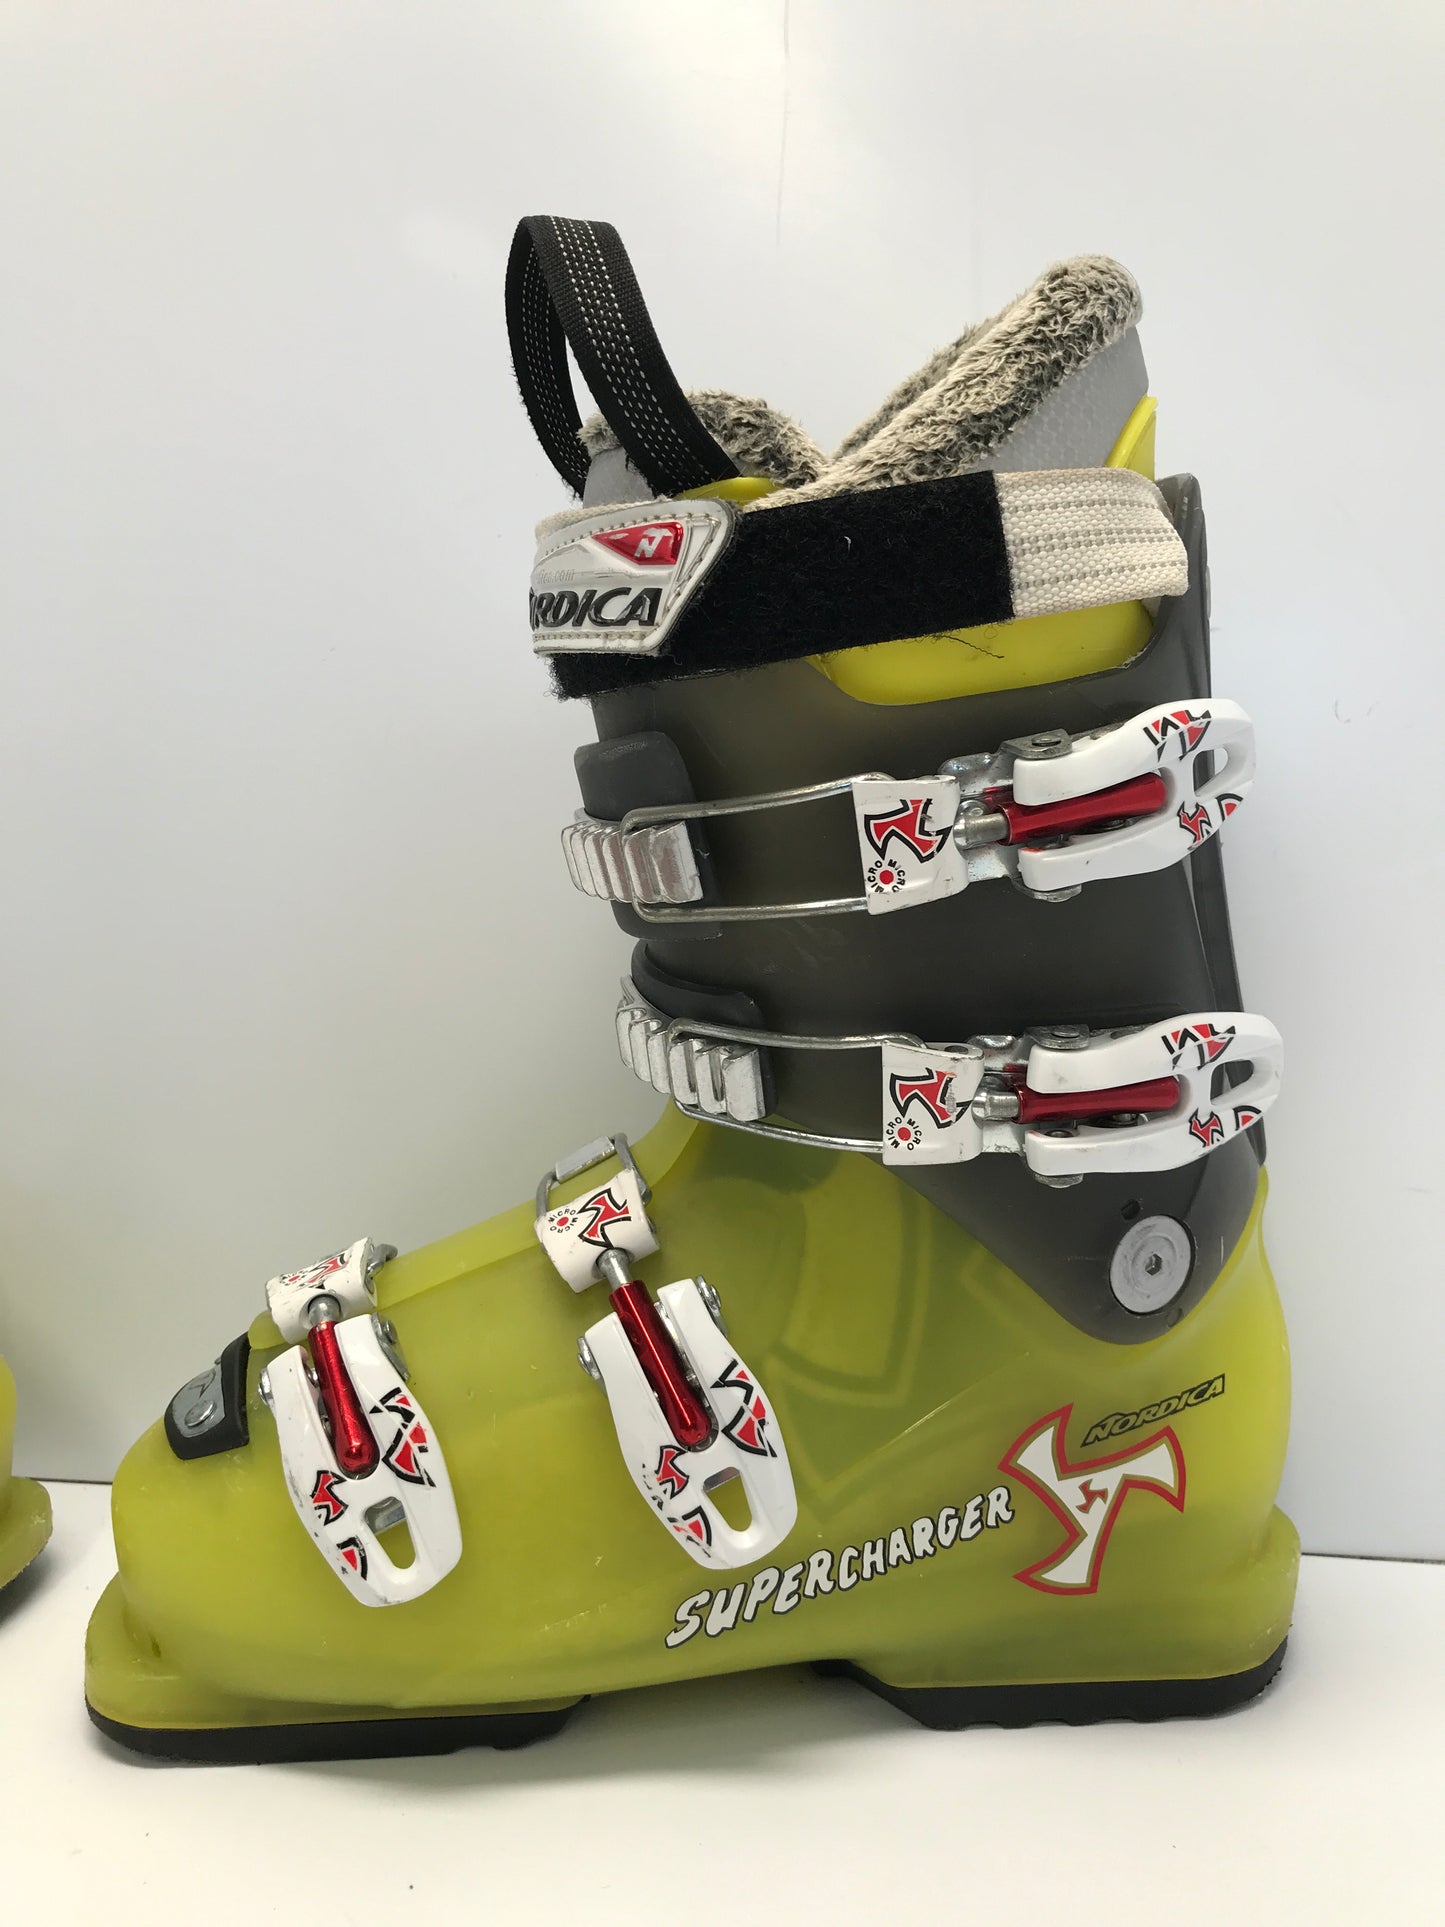 Ski Boots Mondo Size 22.0-22.5 Child Size 3-4 268mm Nordica Super Charge Lime Grey Red